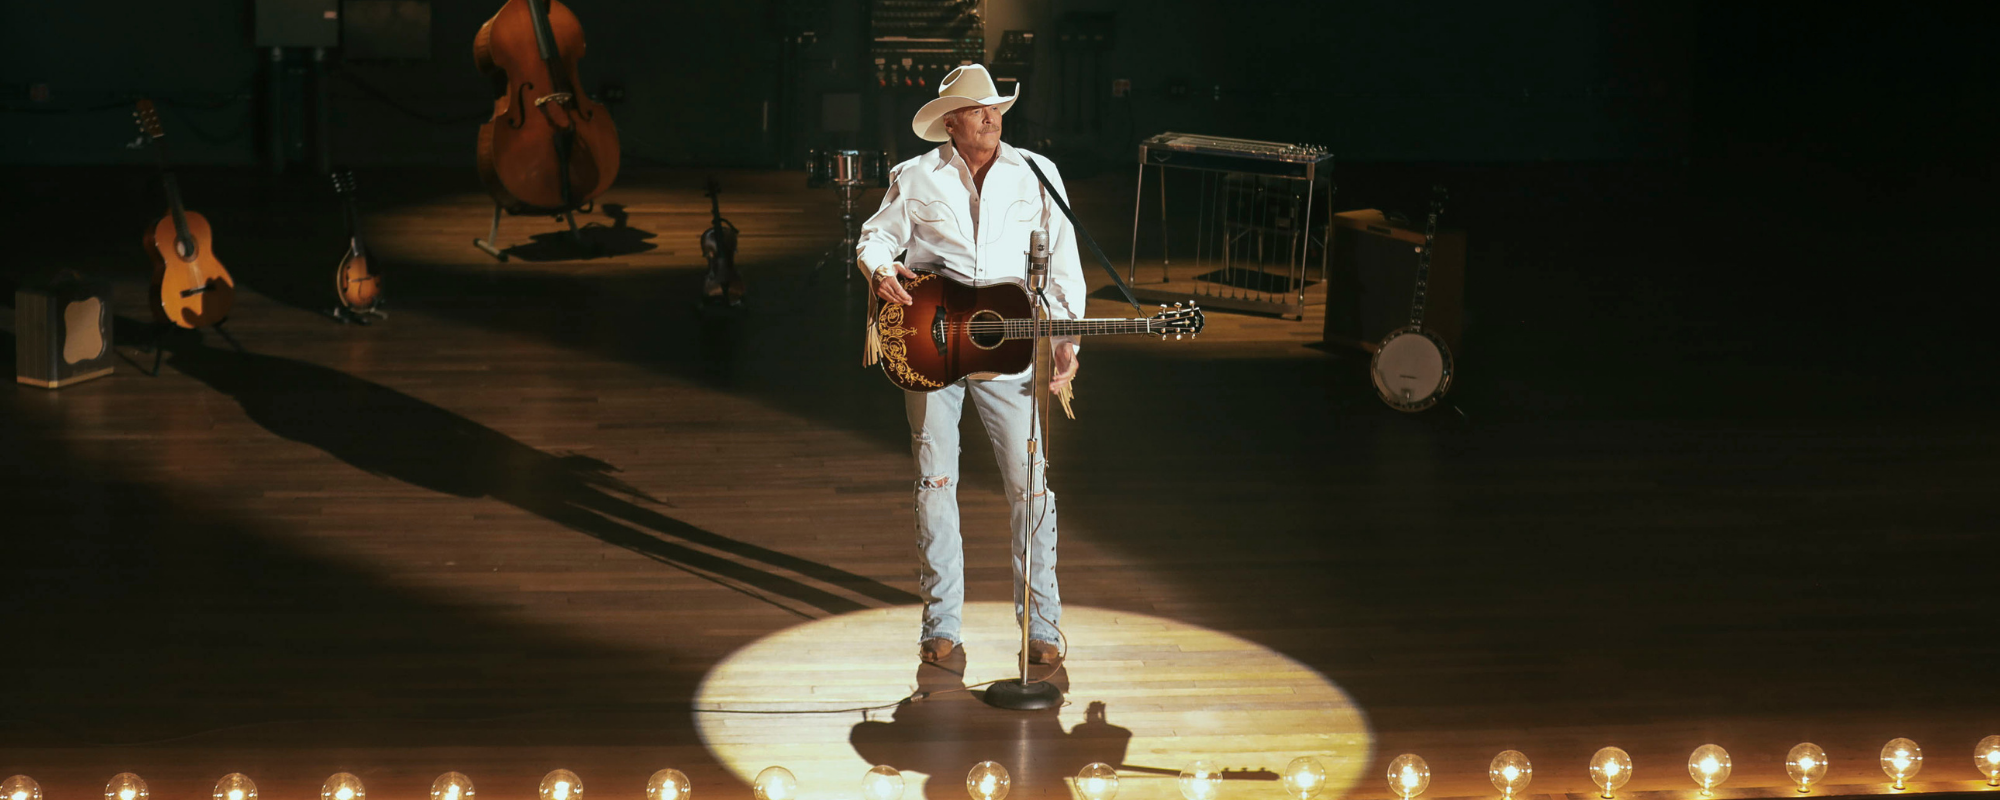 WATCH: Alan Jackson’s Daughter Ali Joins Him on Stage to Sing Wedding Song “You’ll Always Be My Baby”